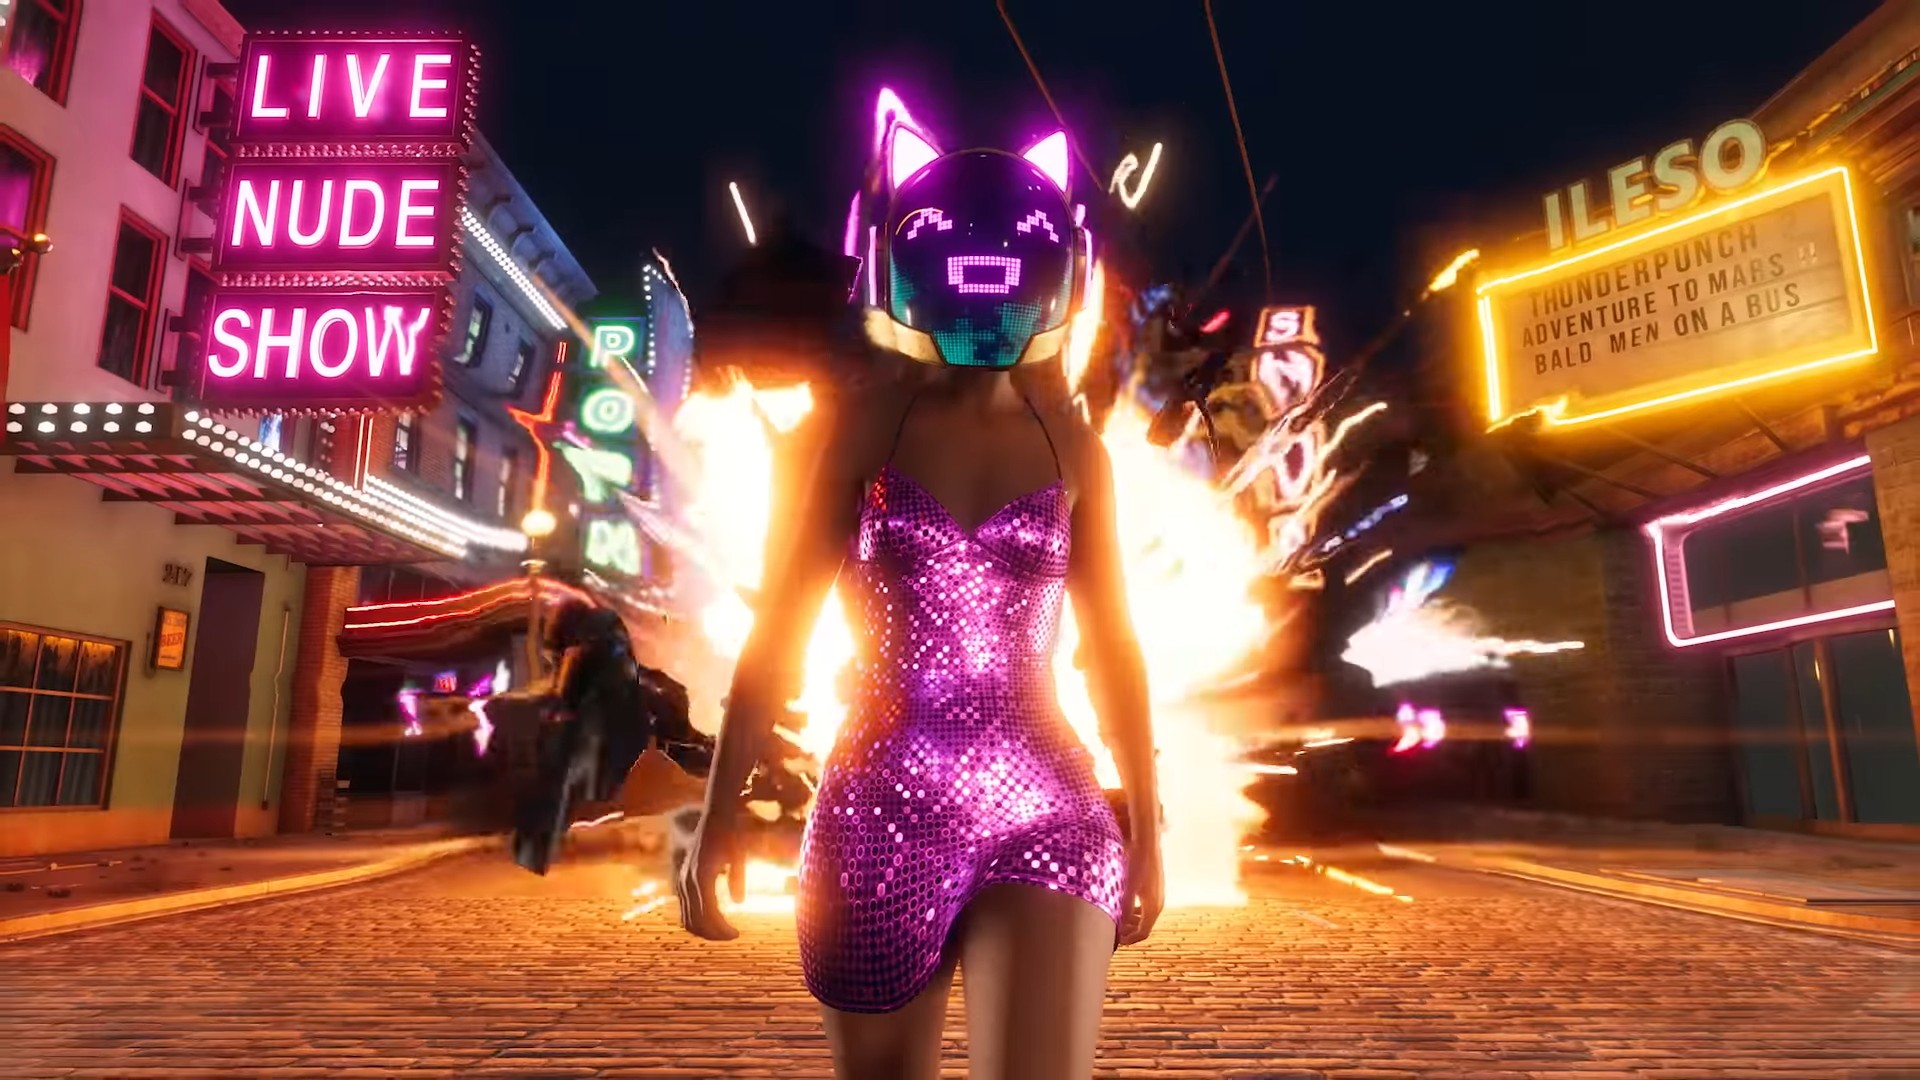 All Saints Row skills and how to unlock them